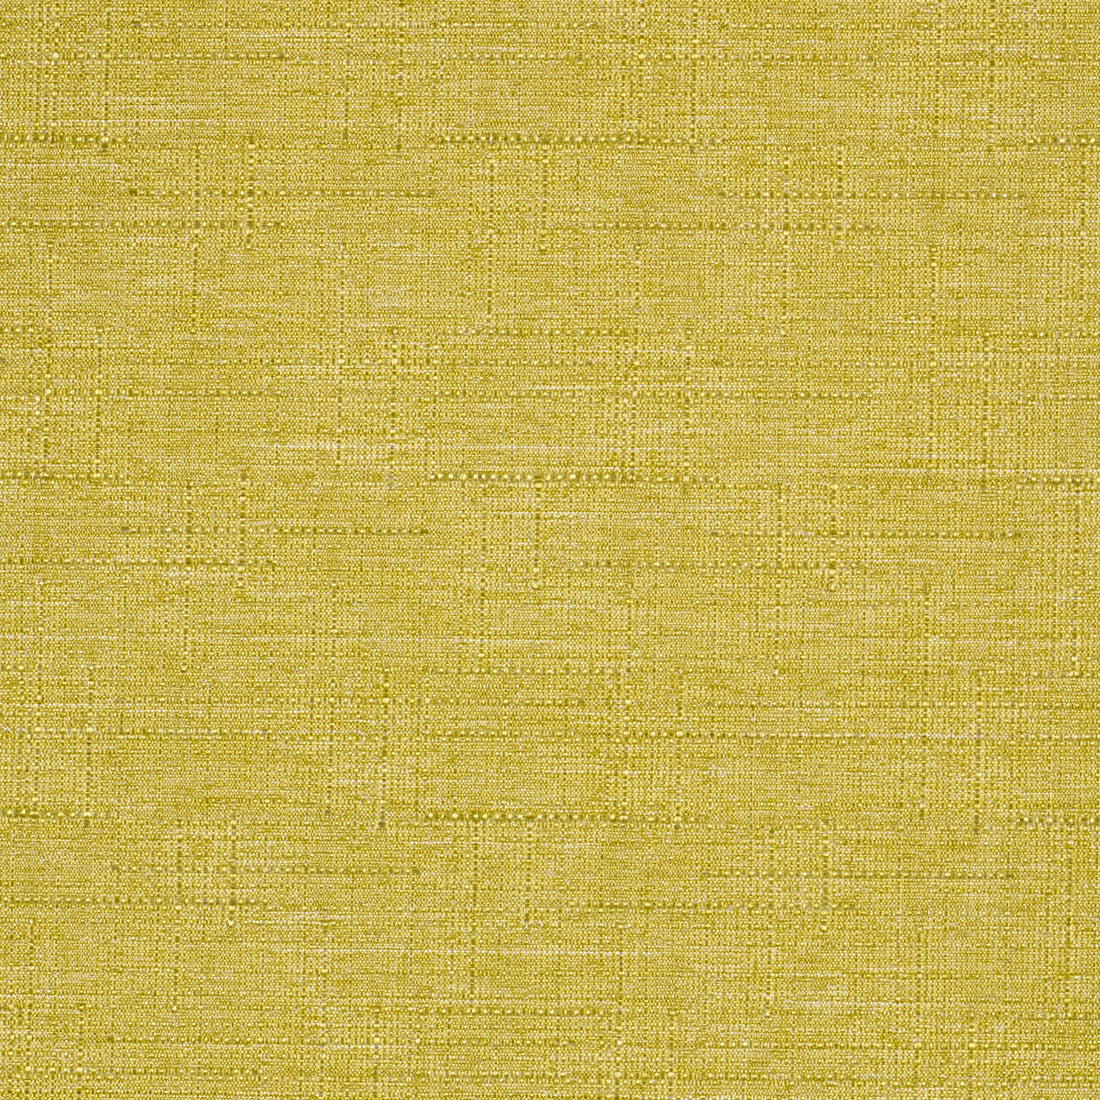 Kravet Contract fabric in 4321-23 color - pattern 4321.23.0 - by Kravet Contract